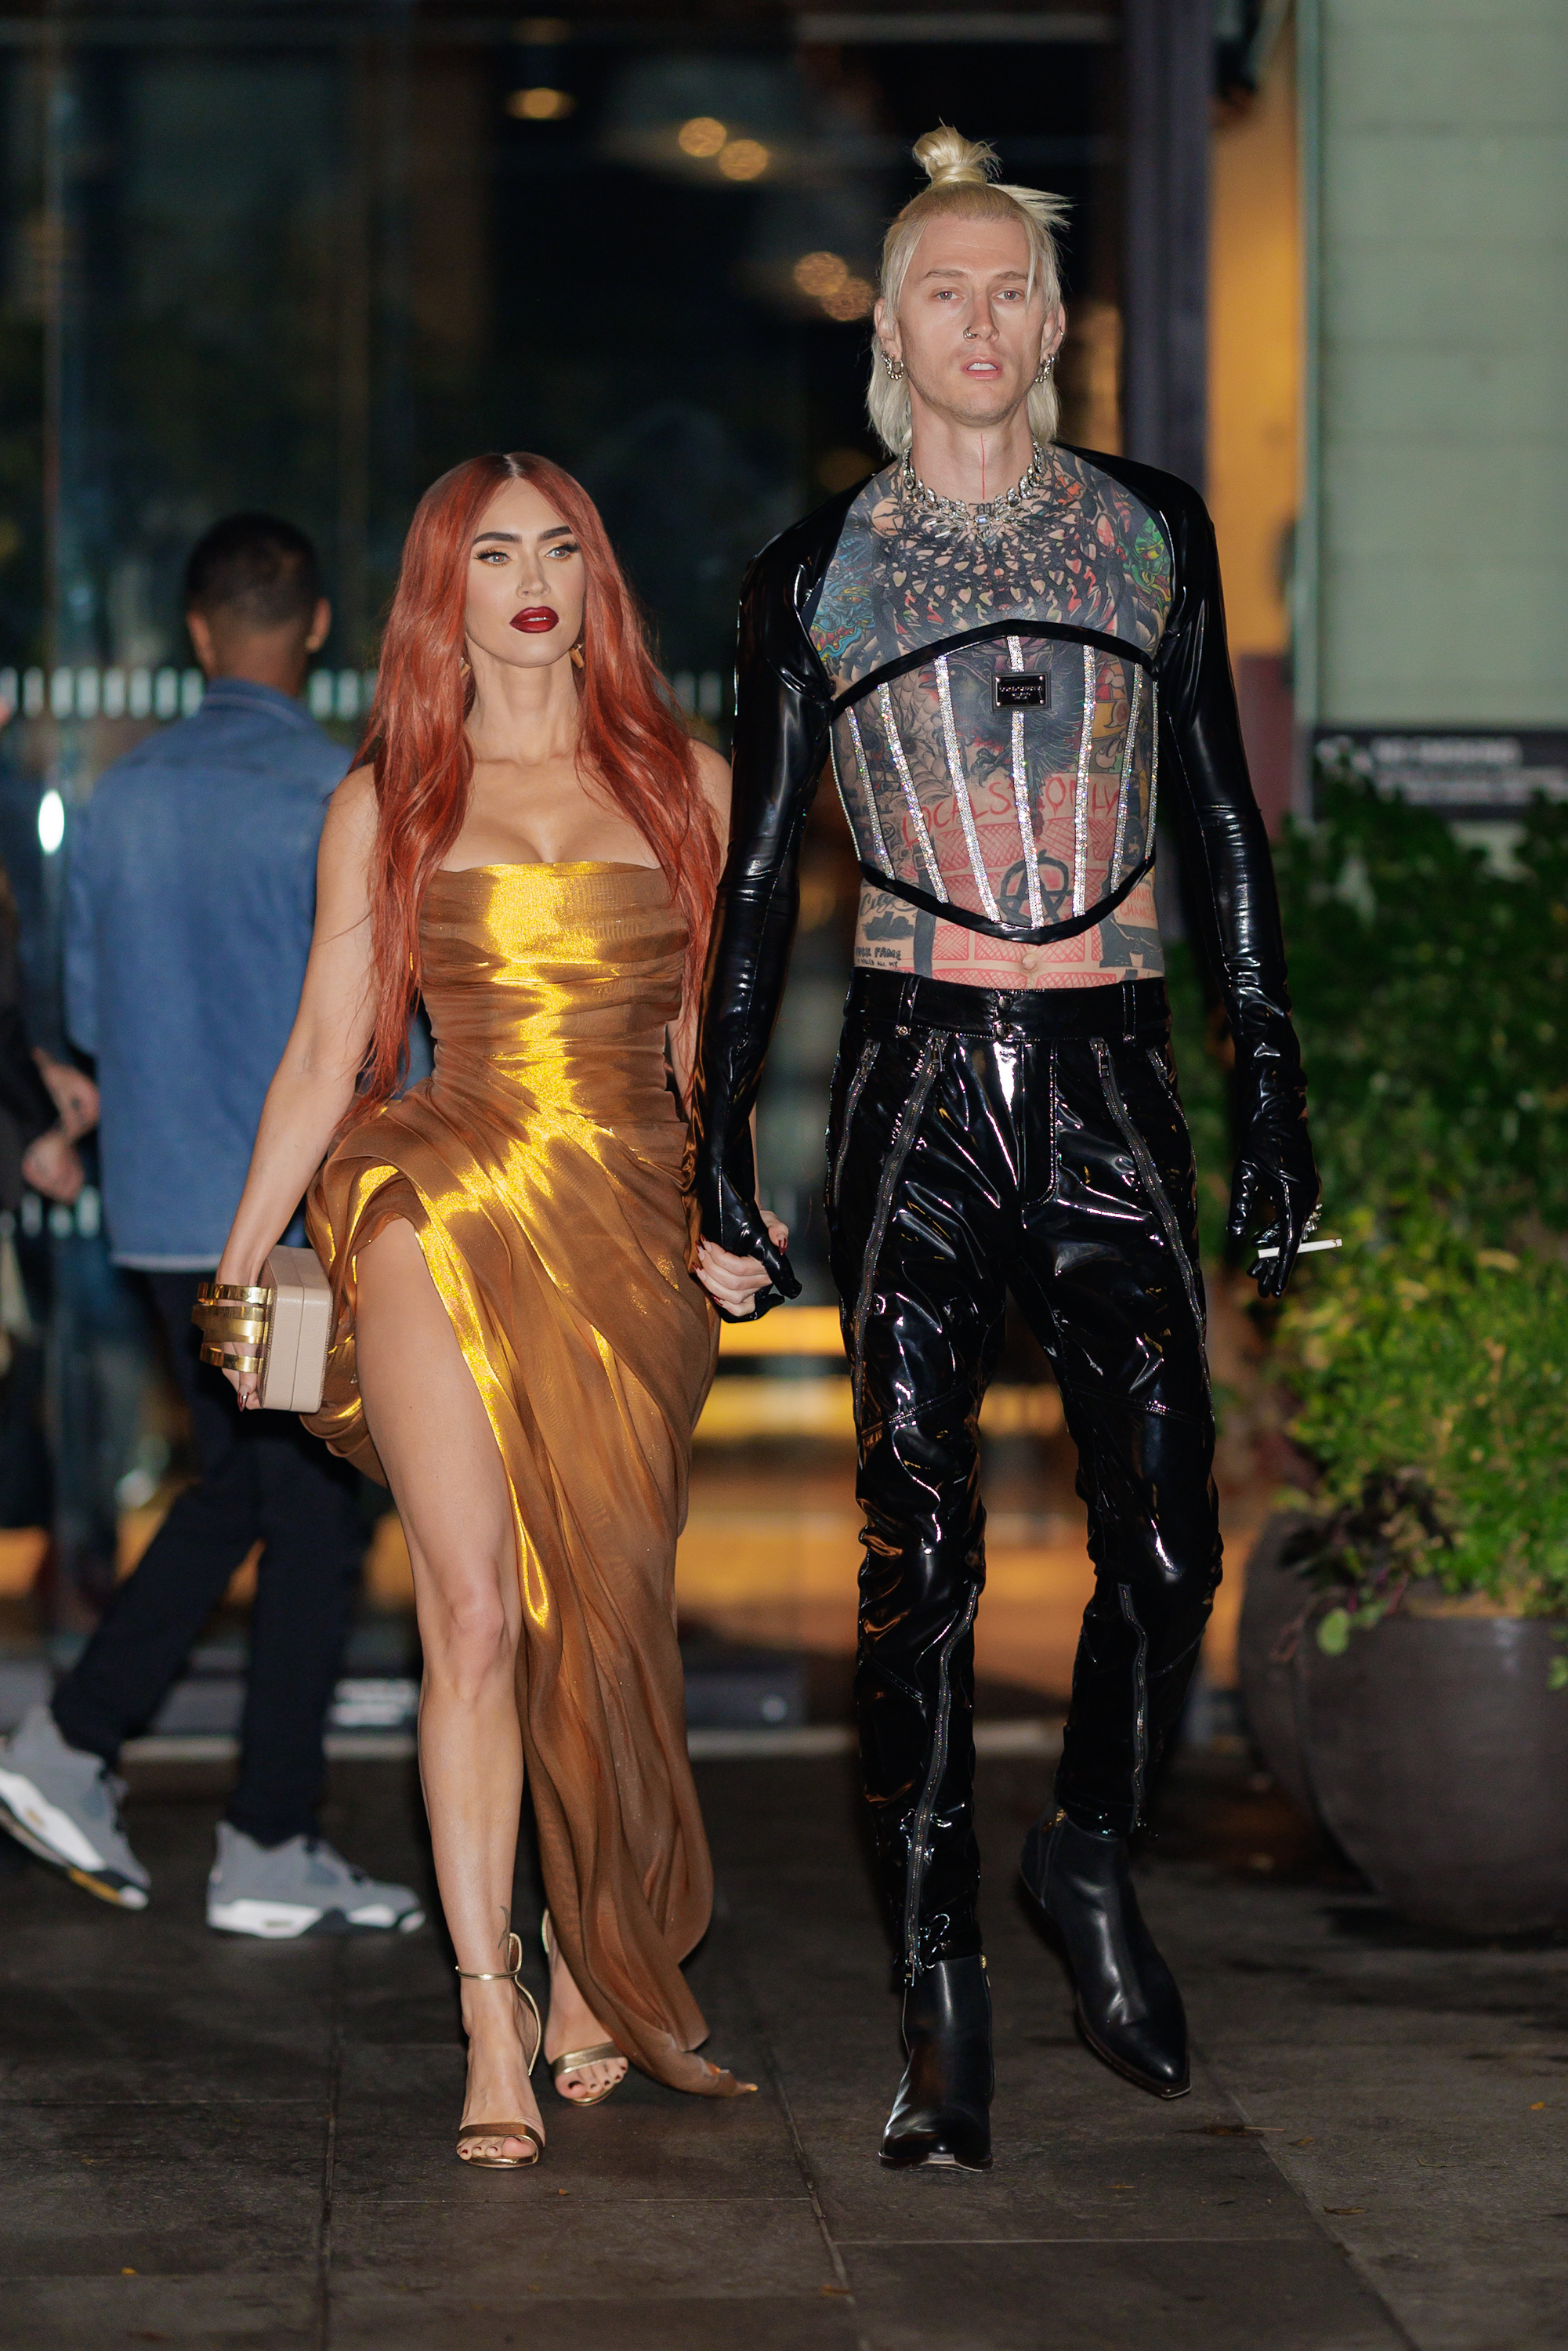 Megan Fox in a strapless gown with high slit, holding hands with Machine Gun Kelly in a printed shirt, chest armor, and vinyl pants. Both walking outdoors